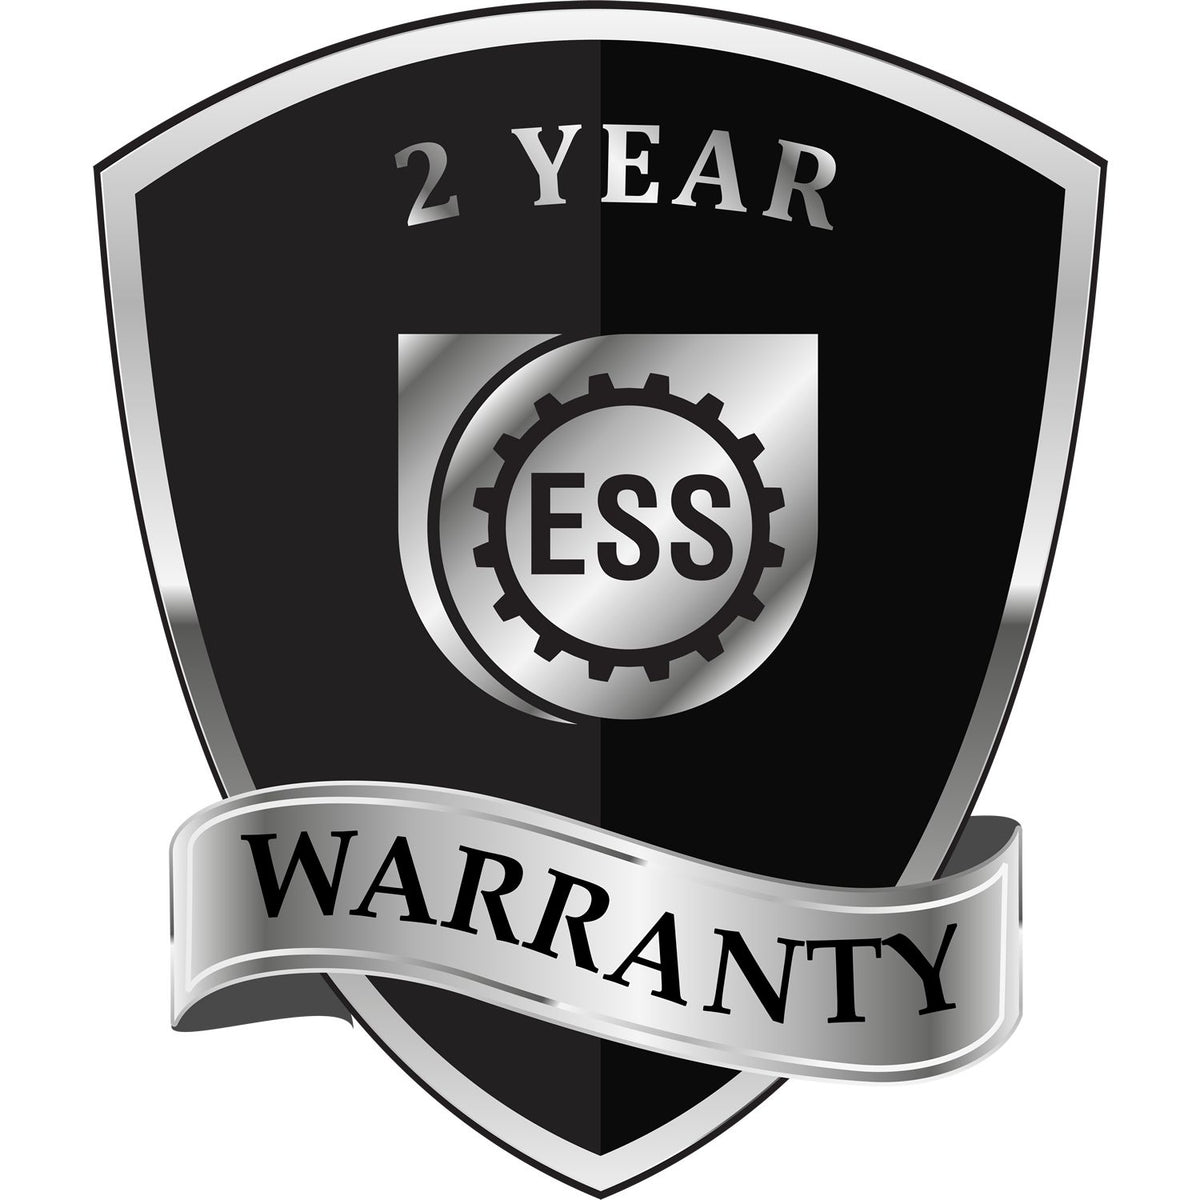 A black and silver badge or emblem showing warranty information for the Hybrid Massachusetts Landscape Architect Seal